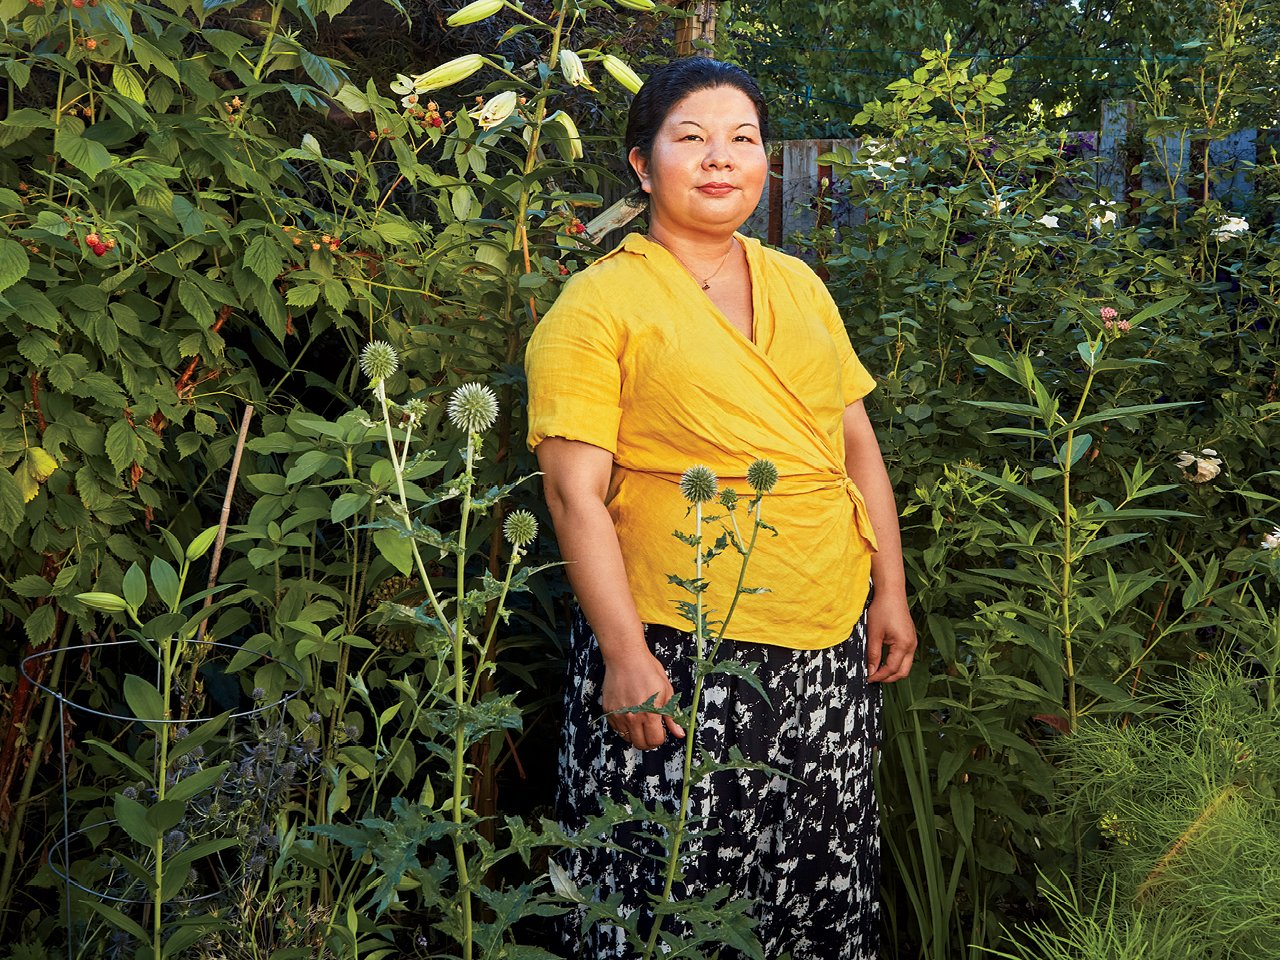 A photo of a woman in a yellow shirt, standing among tall vegetation.